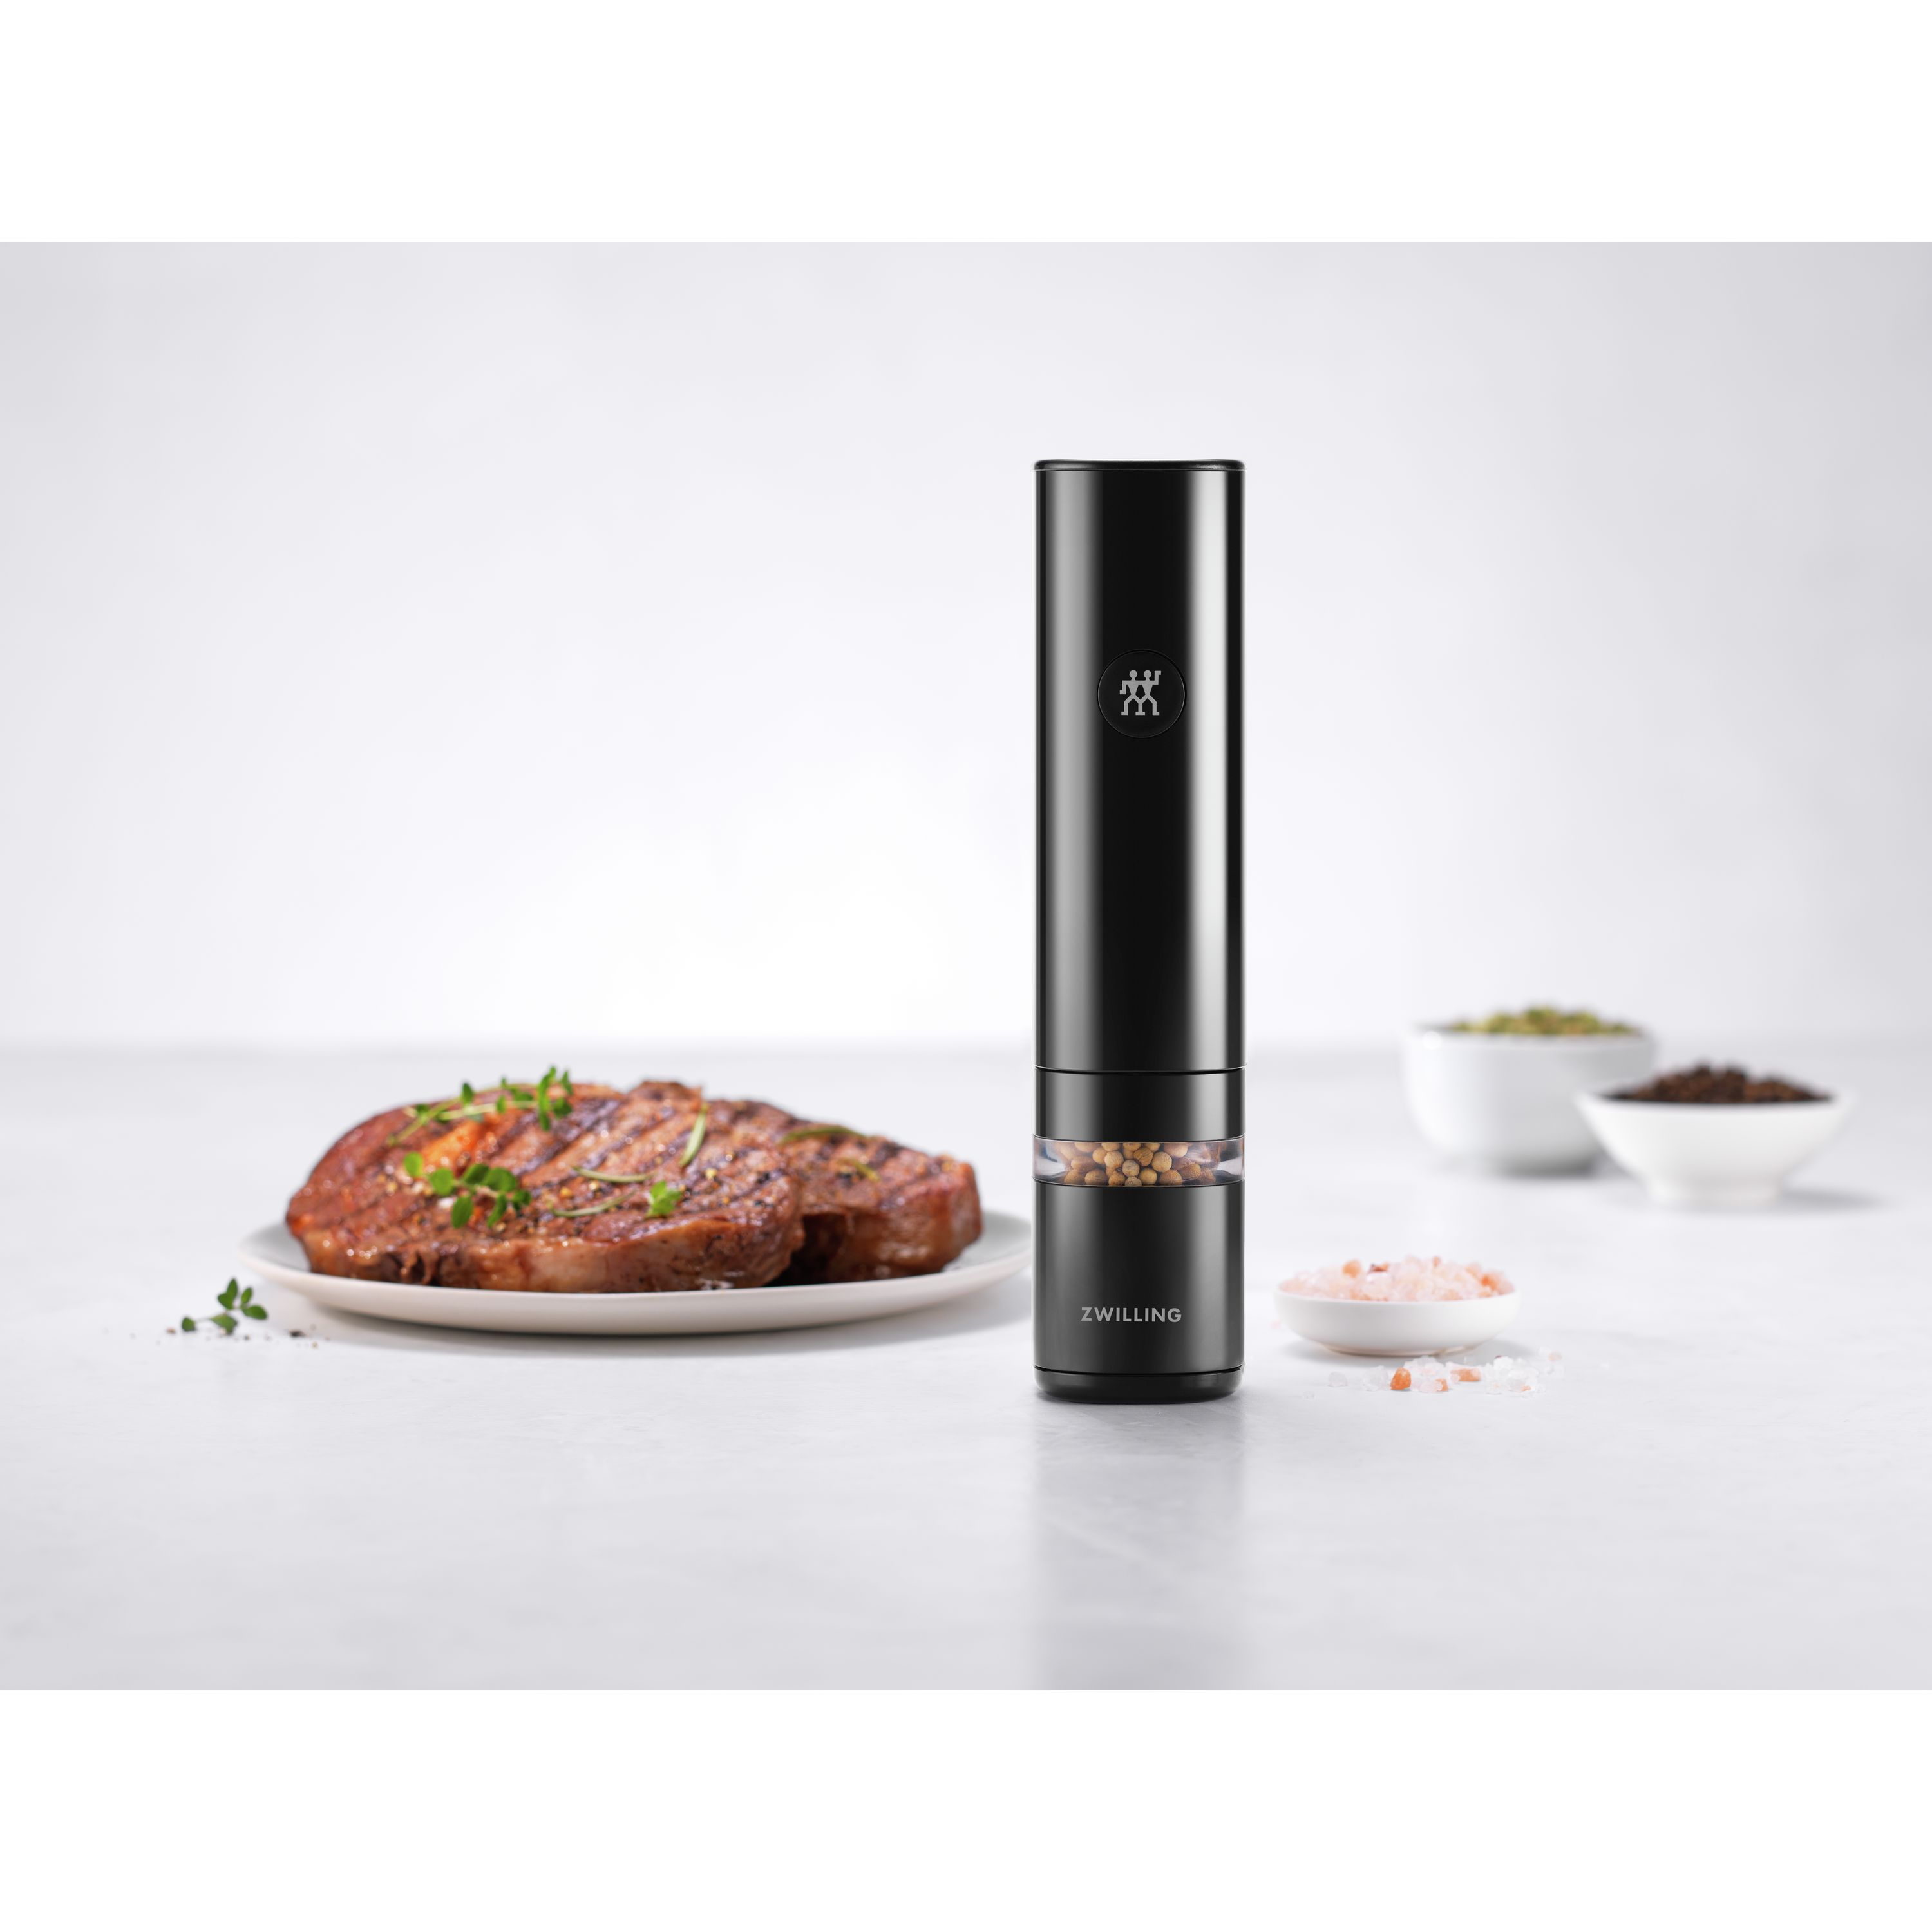 OPUX Battery Operated Salt and Pepper Grinder, Automatic Pepper Mill, Electric  Salt Shaker with LED Light and Bottom Cover